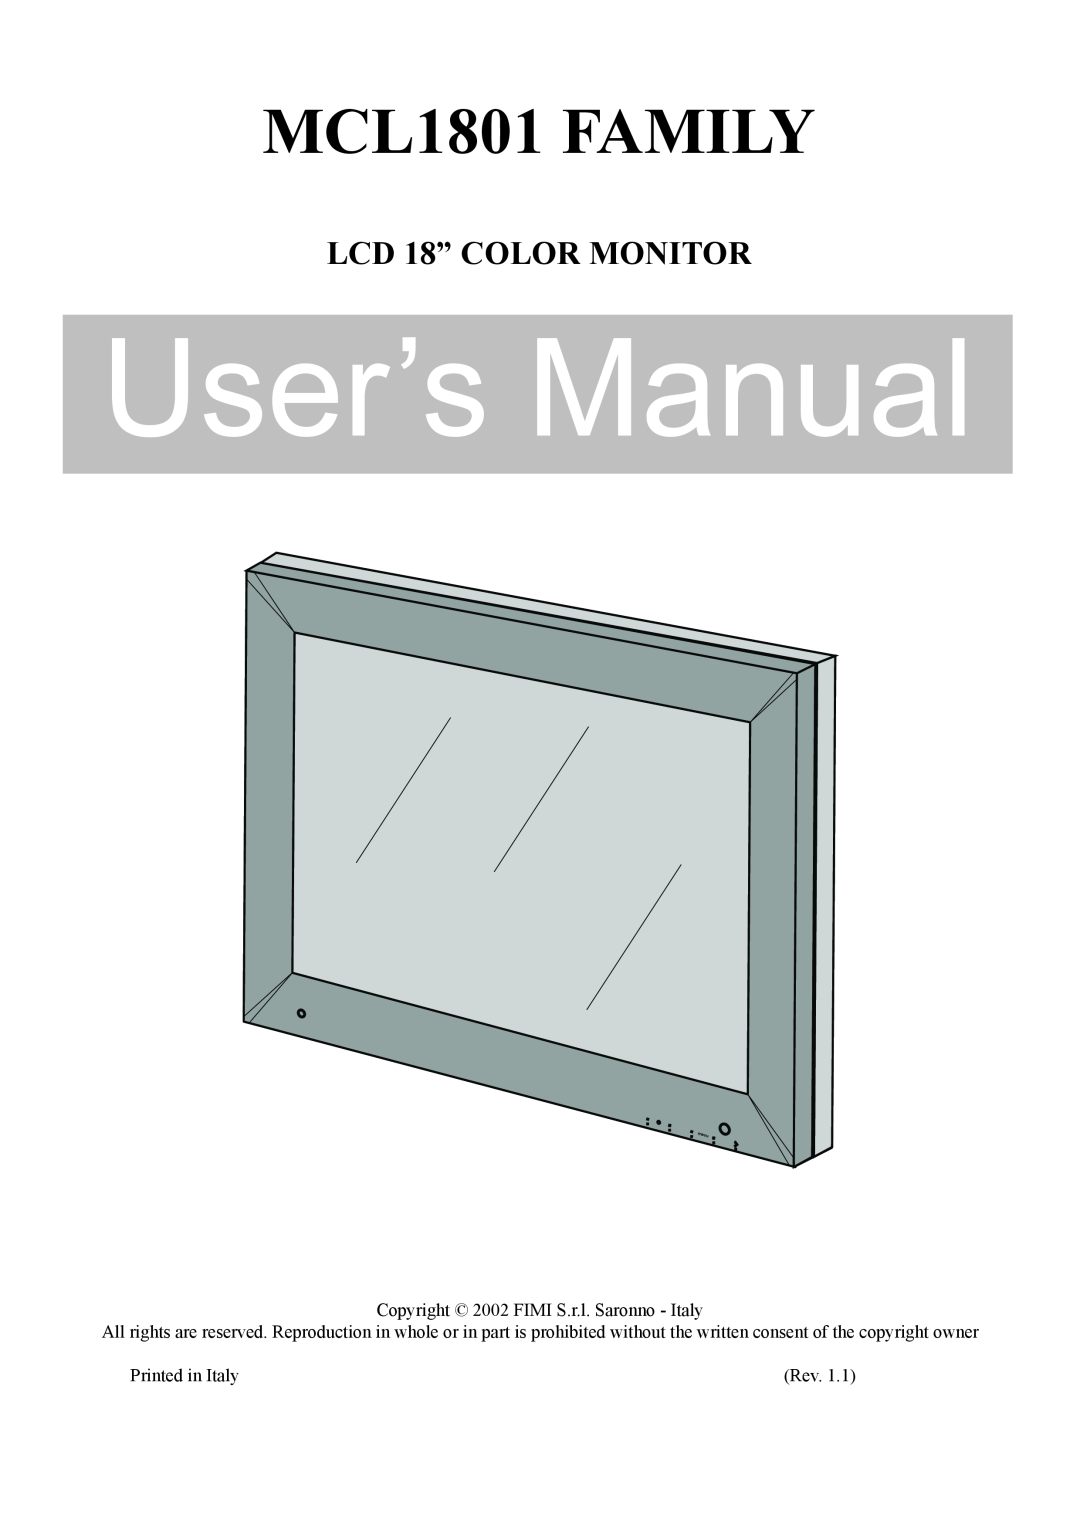 Philips user manual LCD 18” COLOR MONITOR, MCL1801 FAMILY 